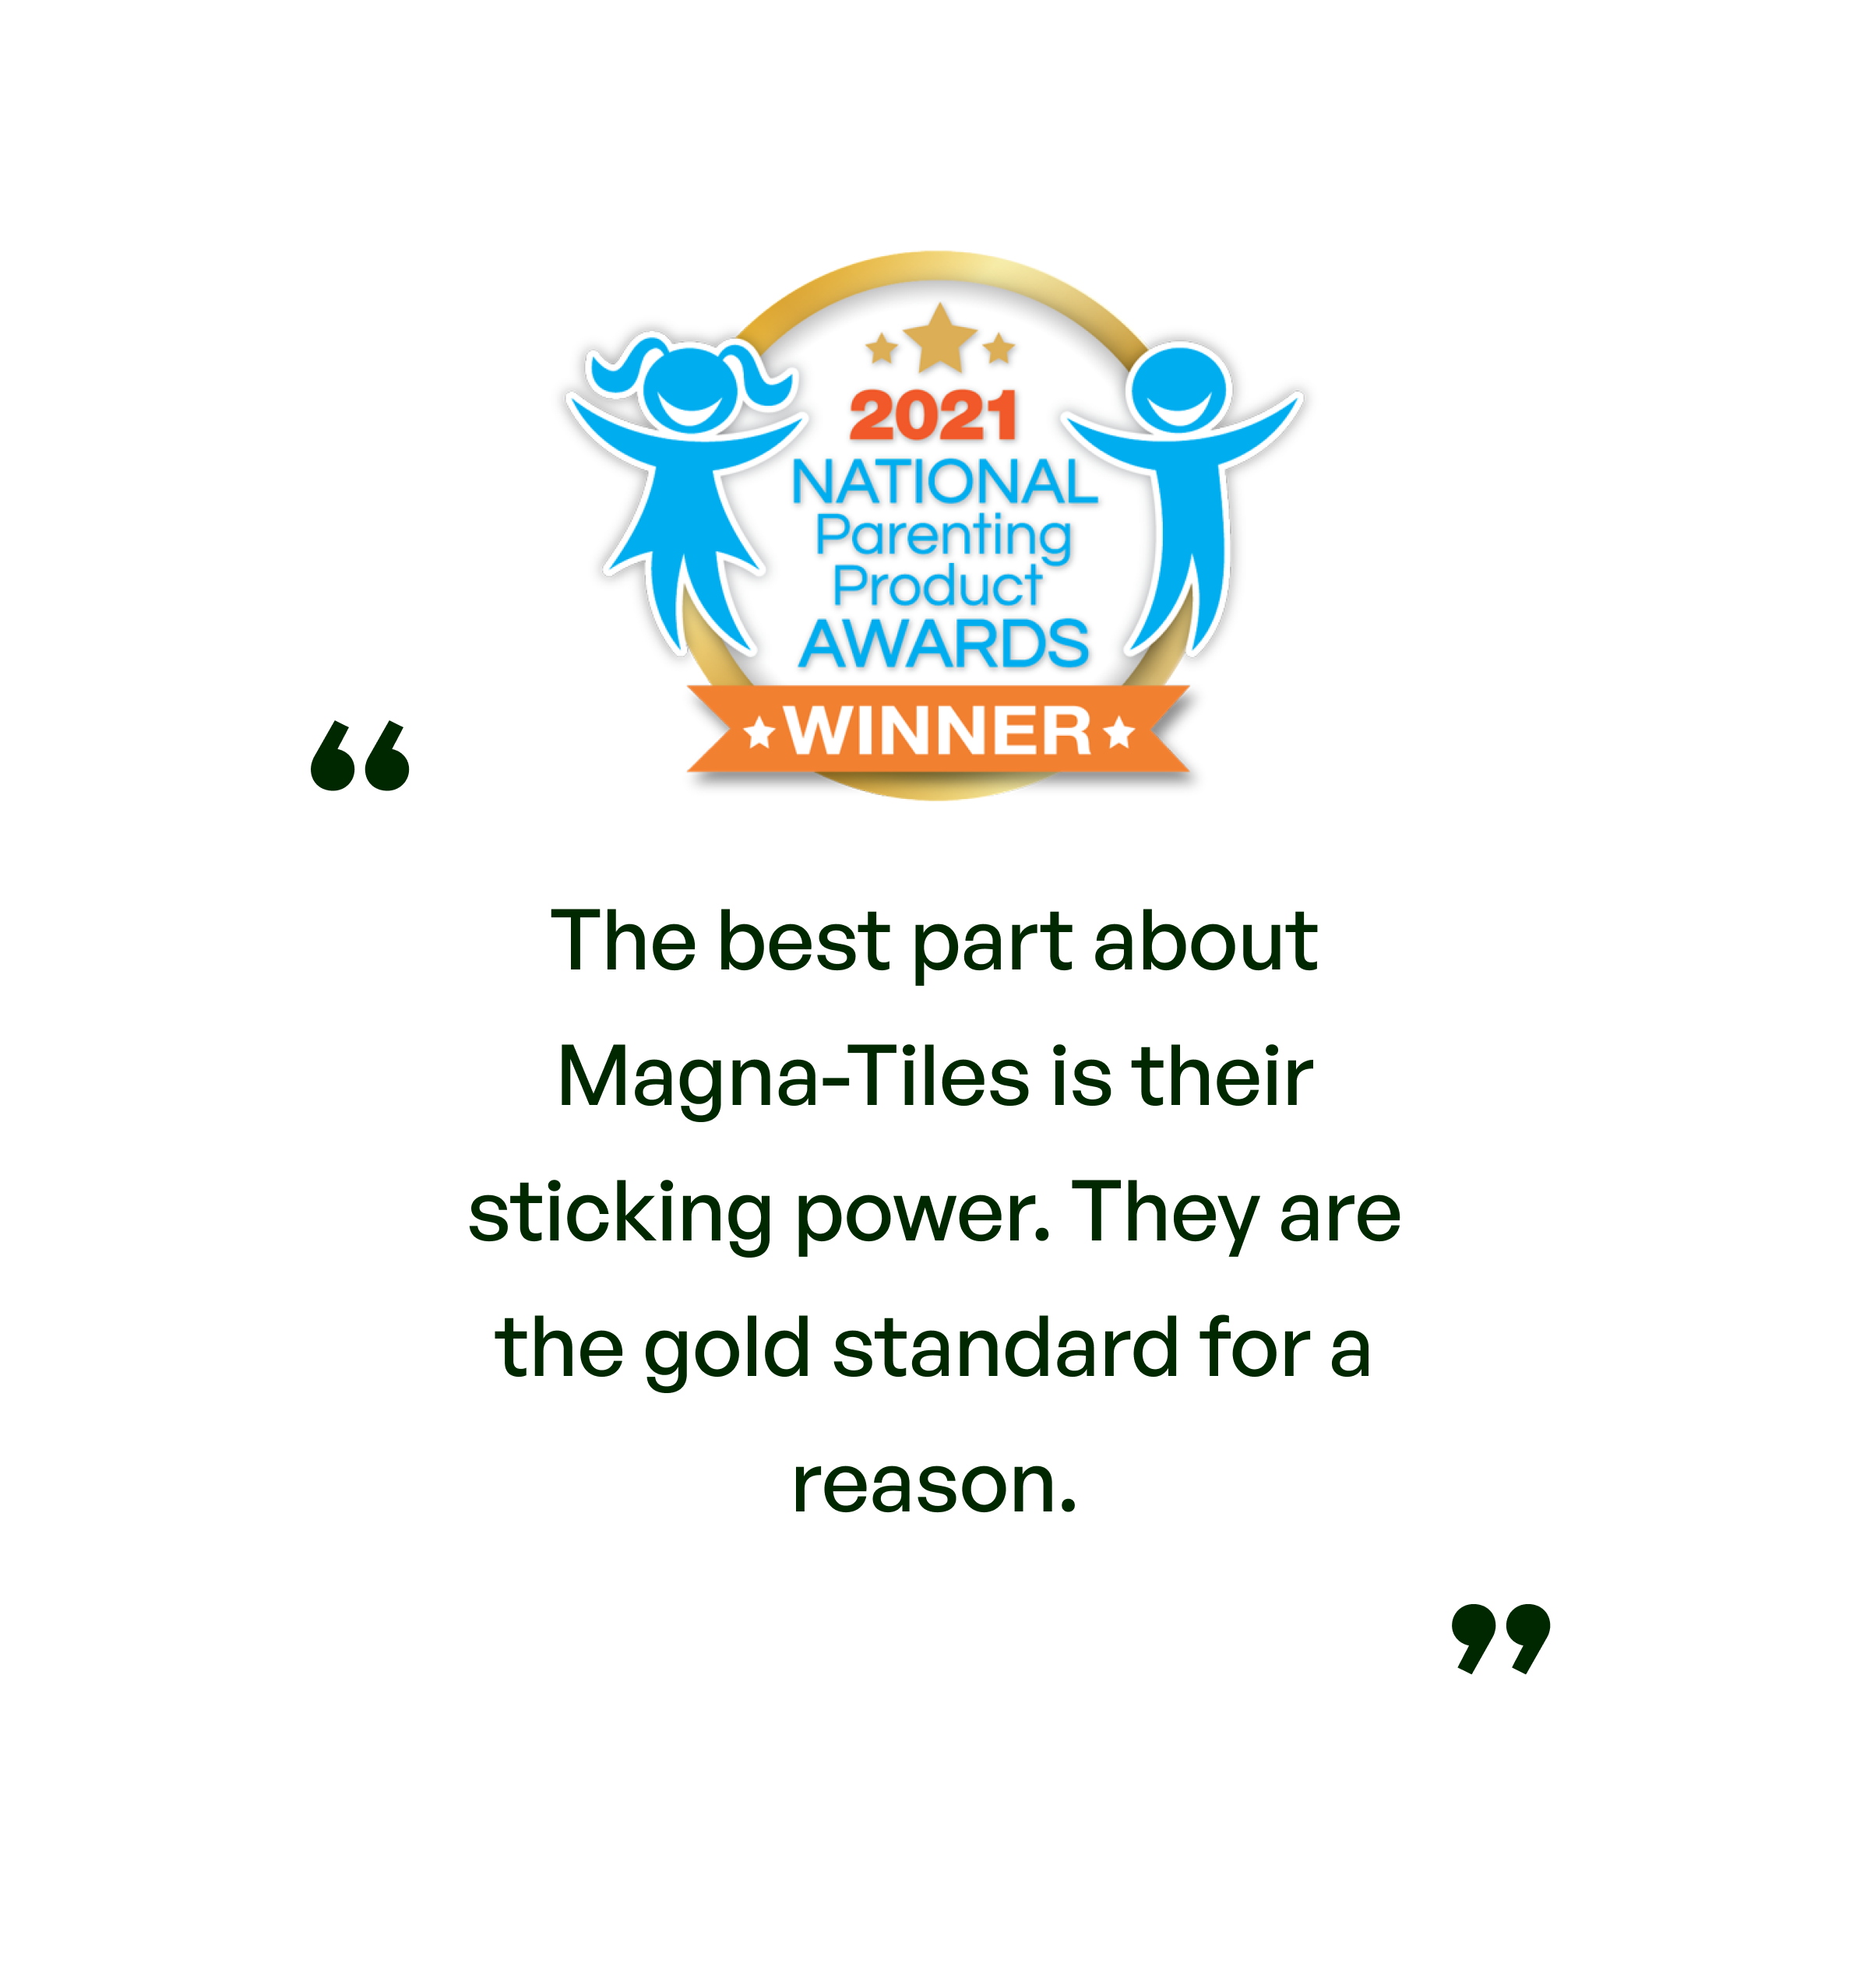 2021 National Parenting Product Awards Winner: The best part about Magna-tiles is their sticking power. They are the gold standard for a reason.